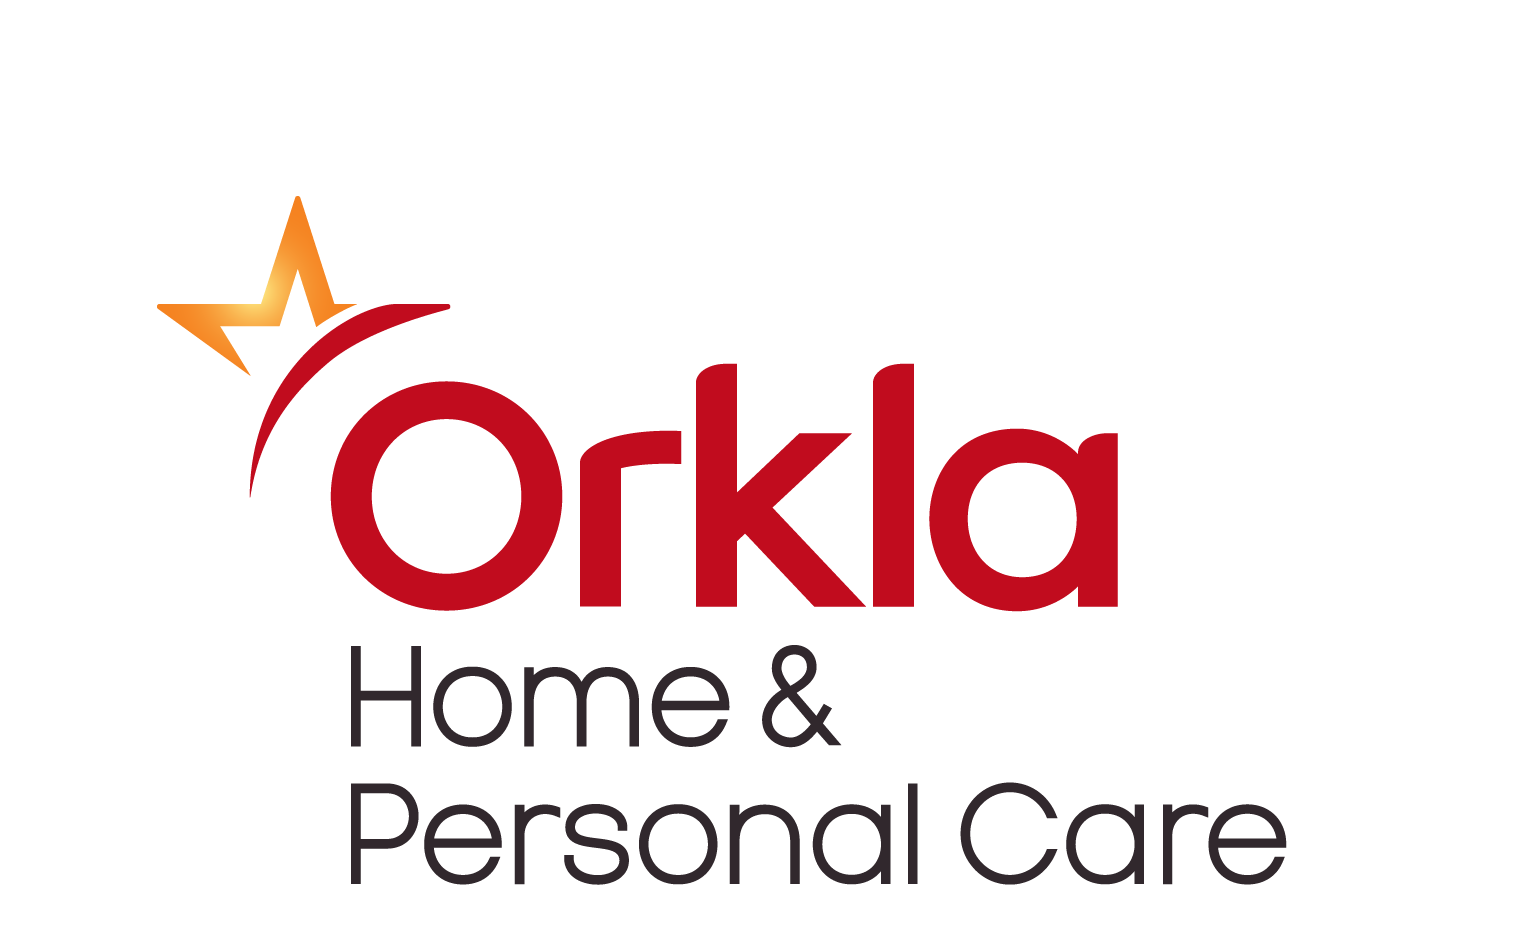 Orkla Home & Personal Care AS